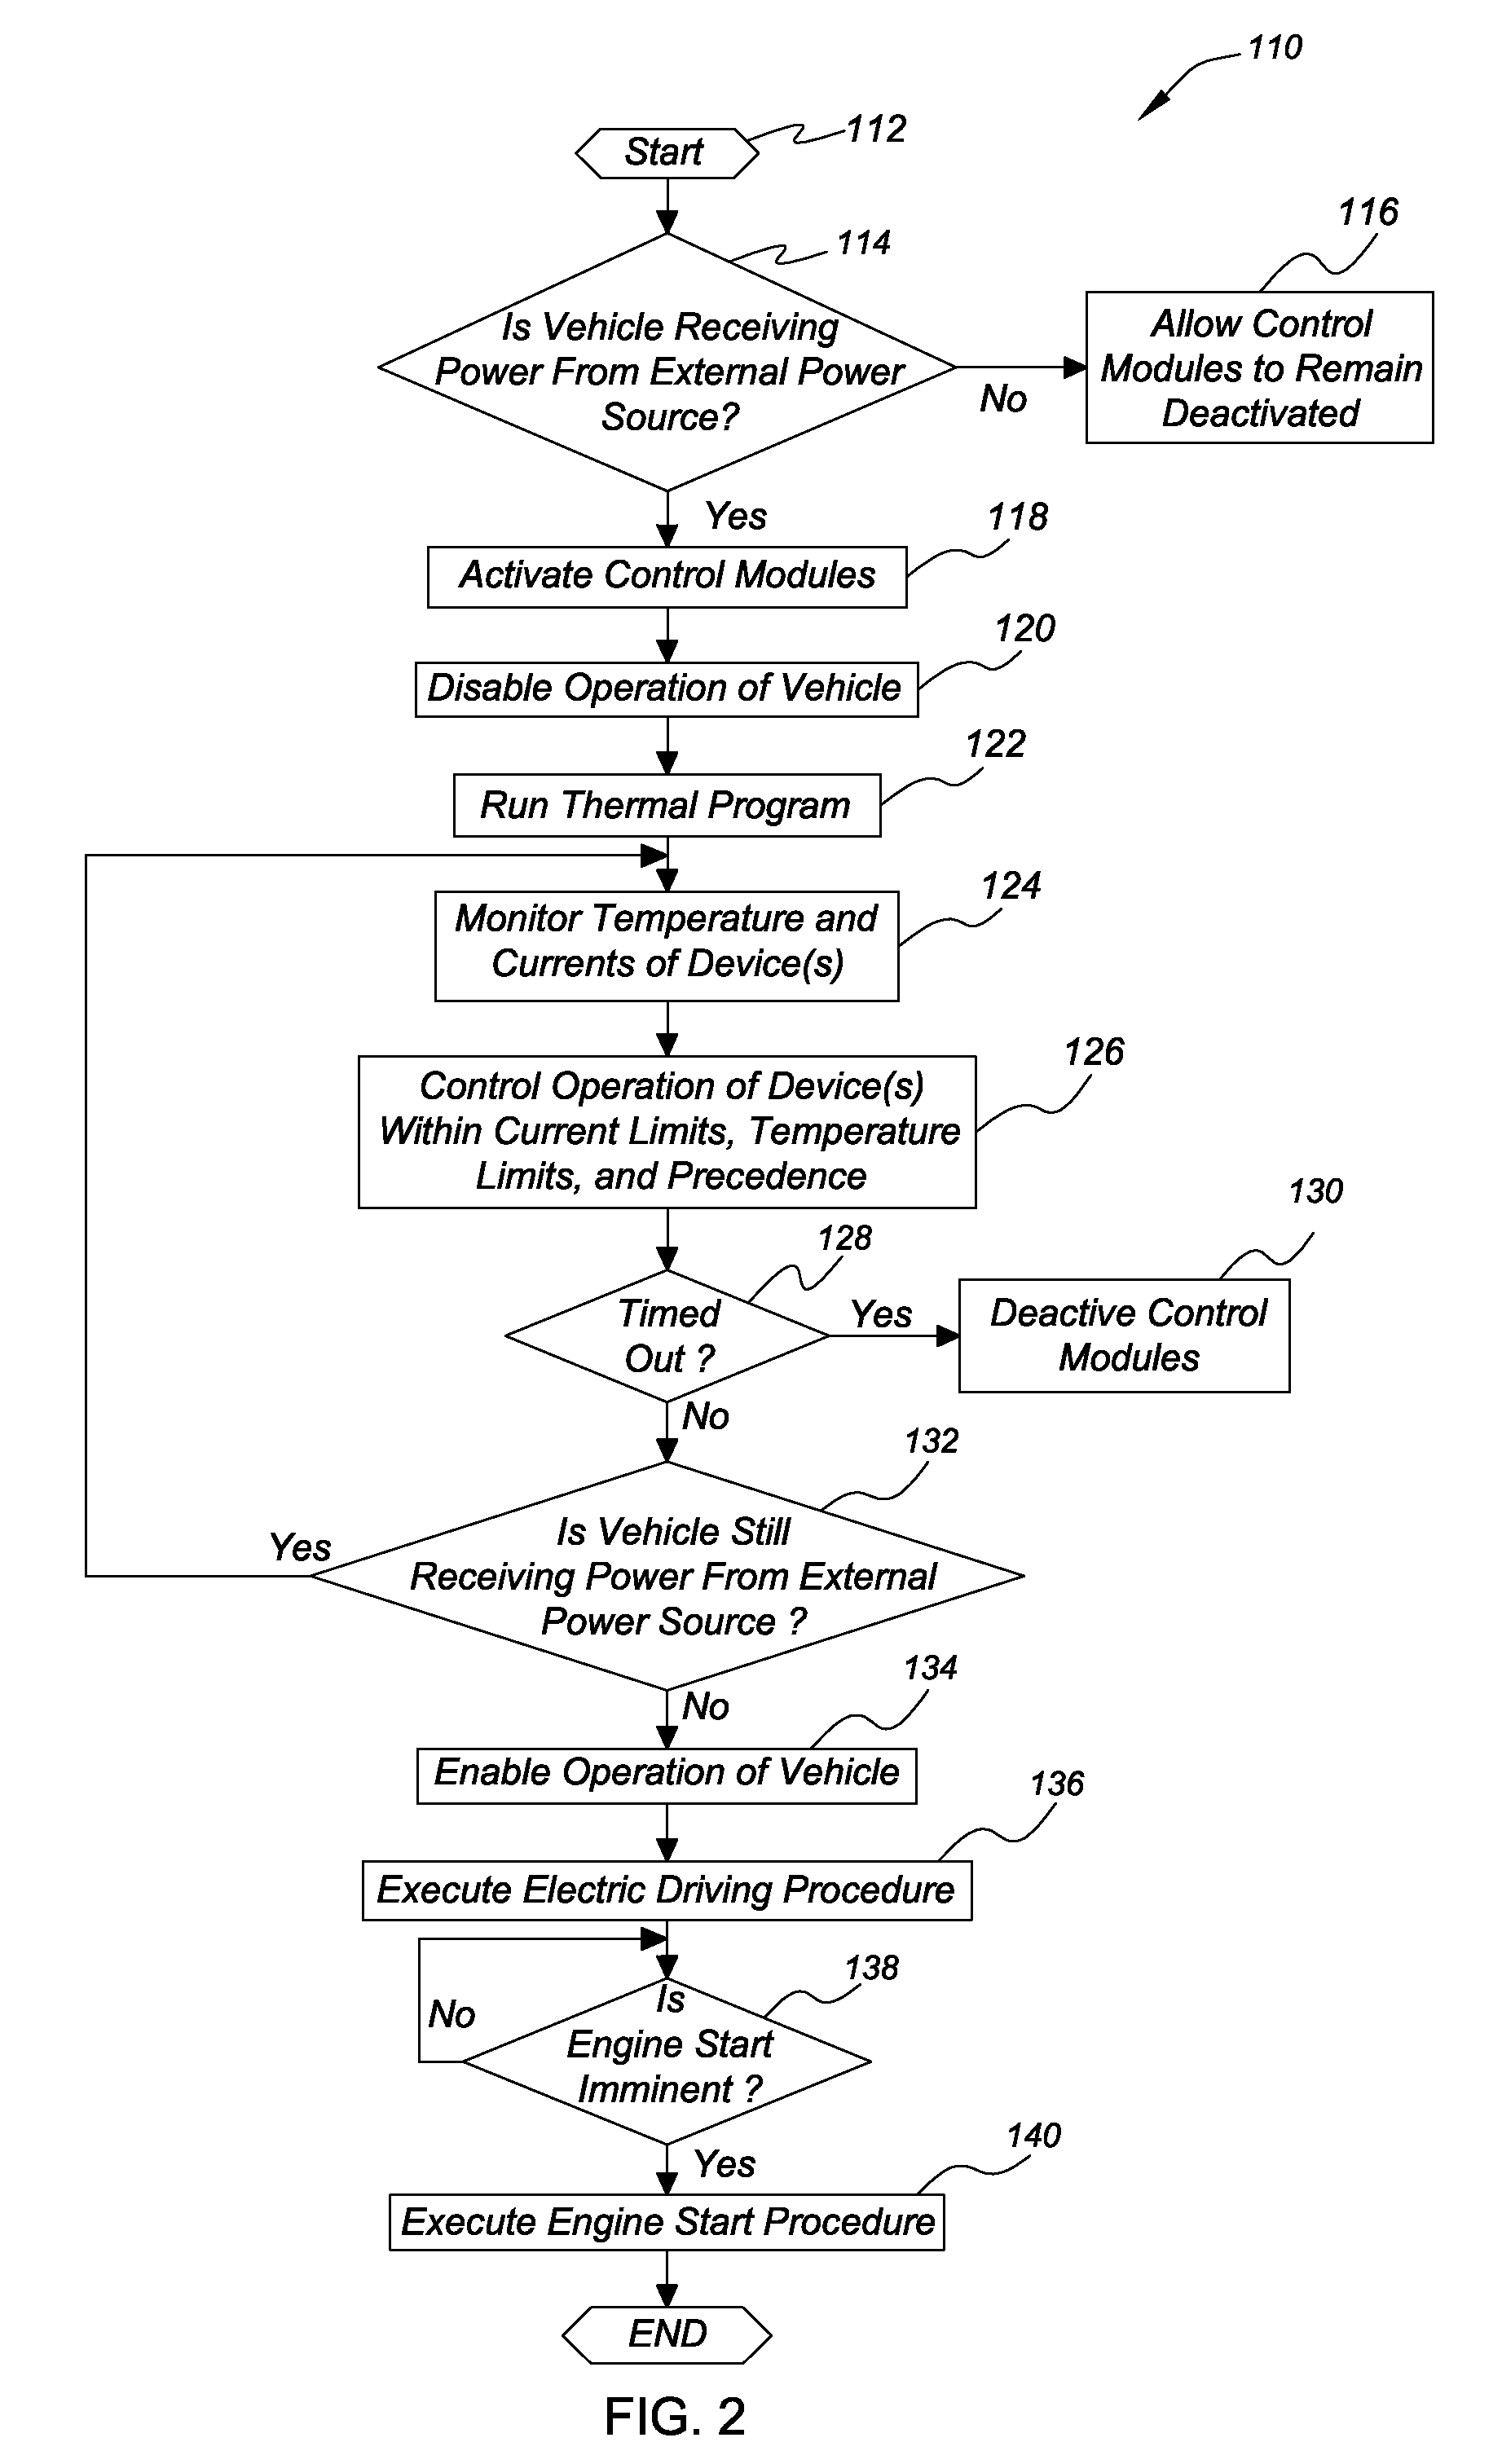 Method of operating a plug-in hybrid electric vehicle